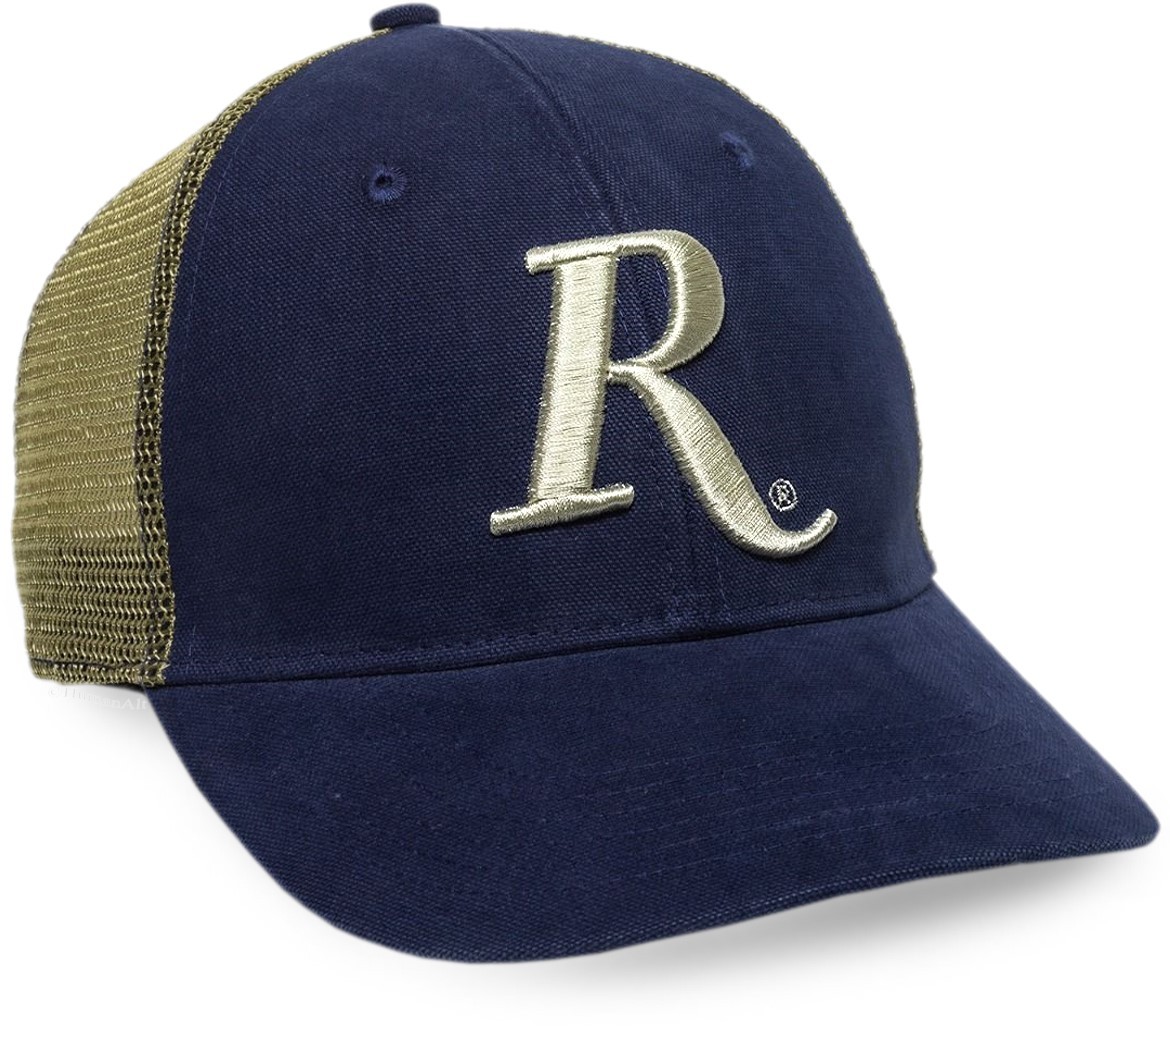 Remington Embroidered R Logo Navy/Tan Cotton Canvas  and Mesh-Back Cap   - $18.99